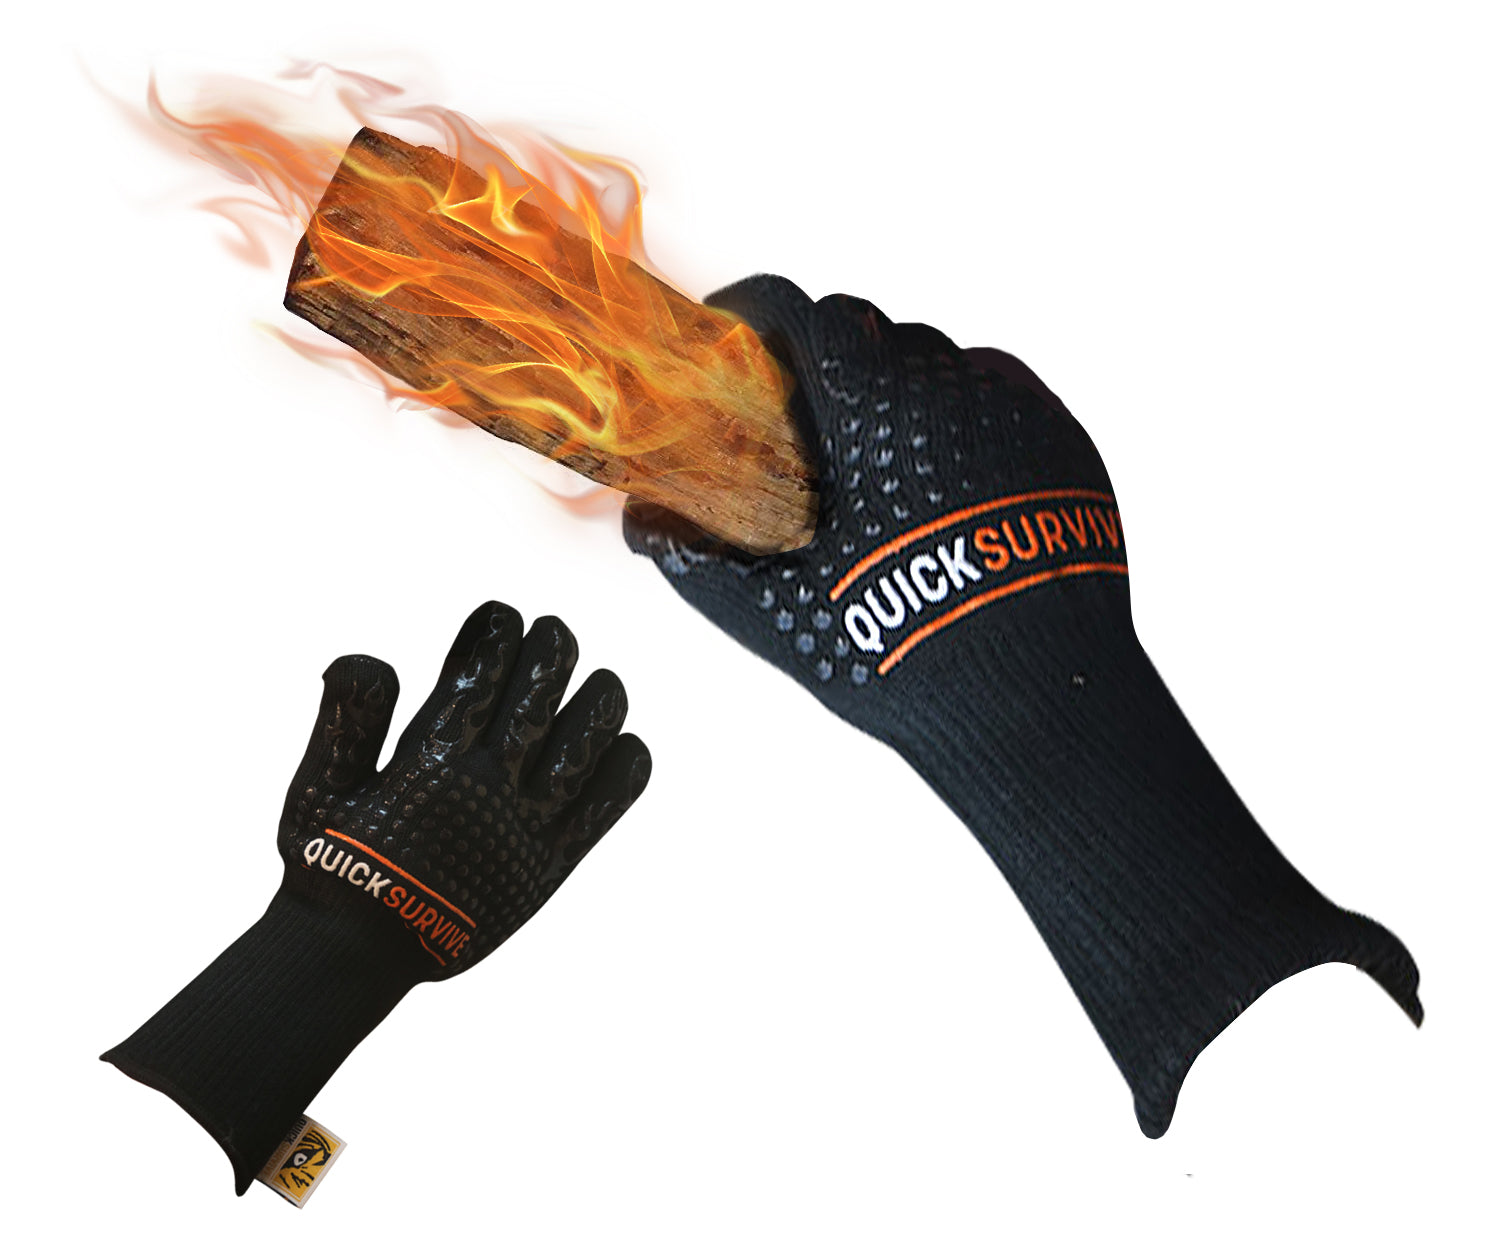 Heat Resistant Fire Safety Glove - QUICKSURVIVE, the highest heat protection grabbing hot fireplace and campfire log